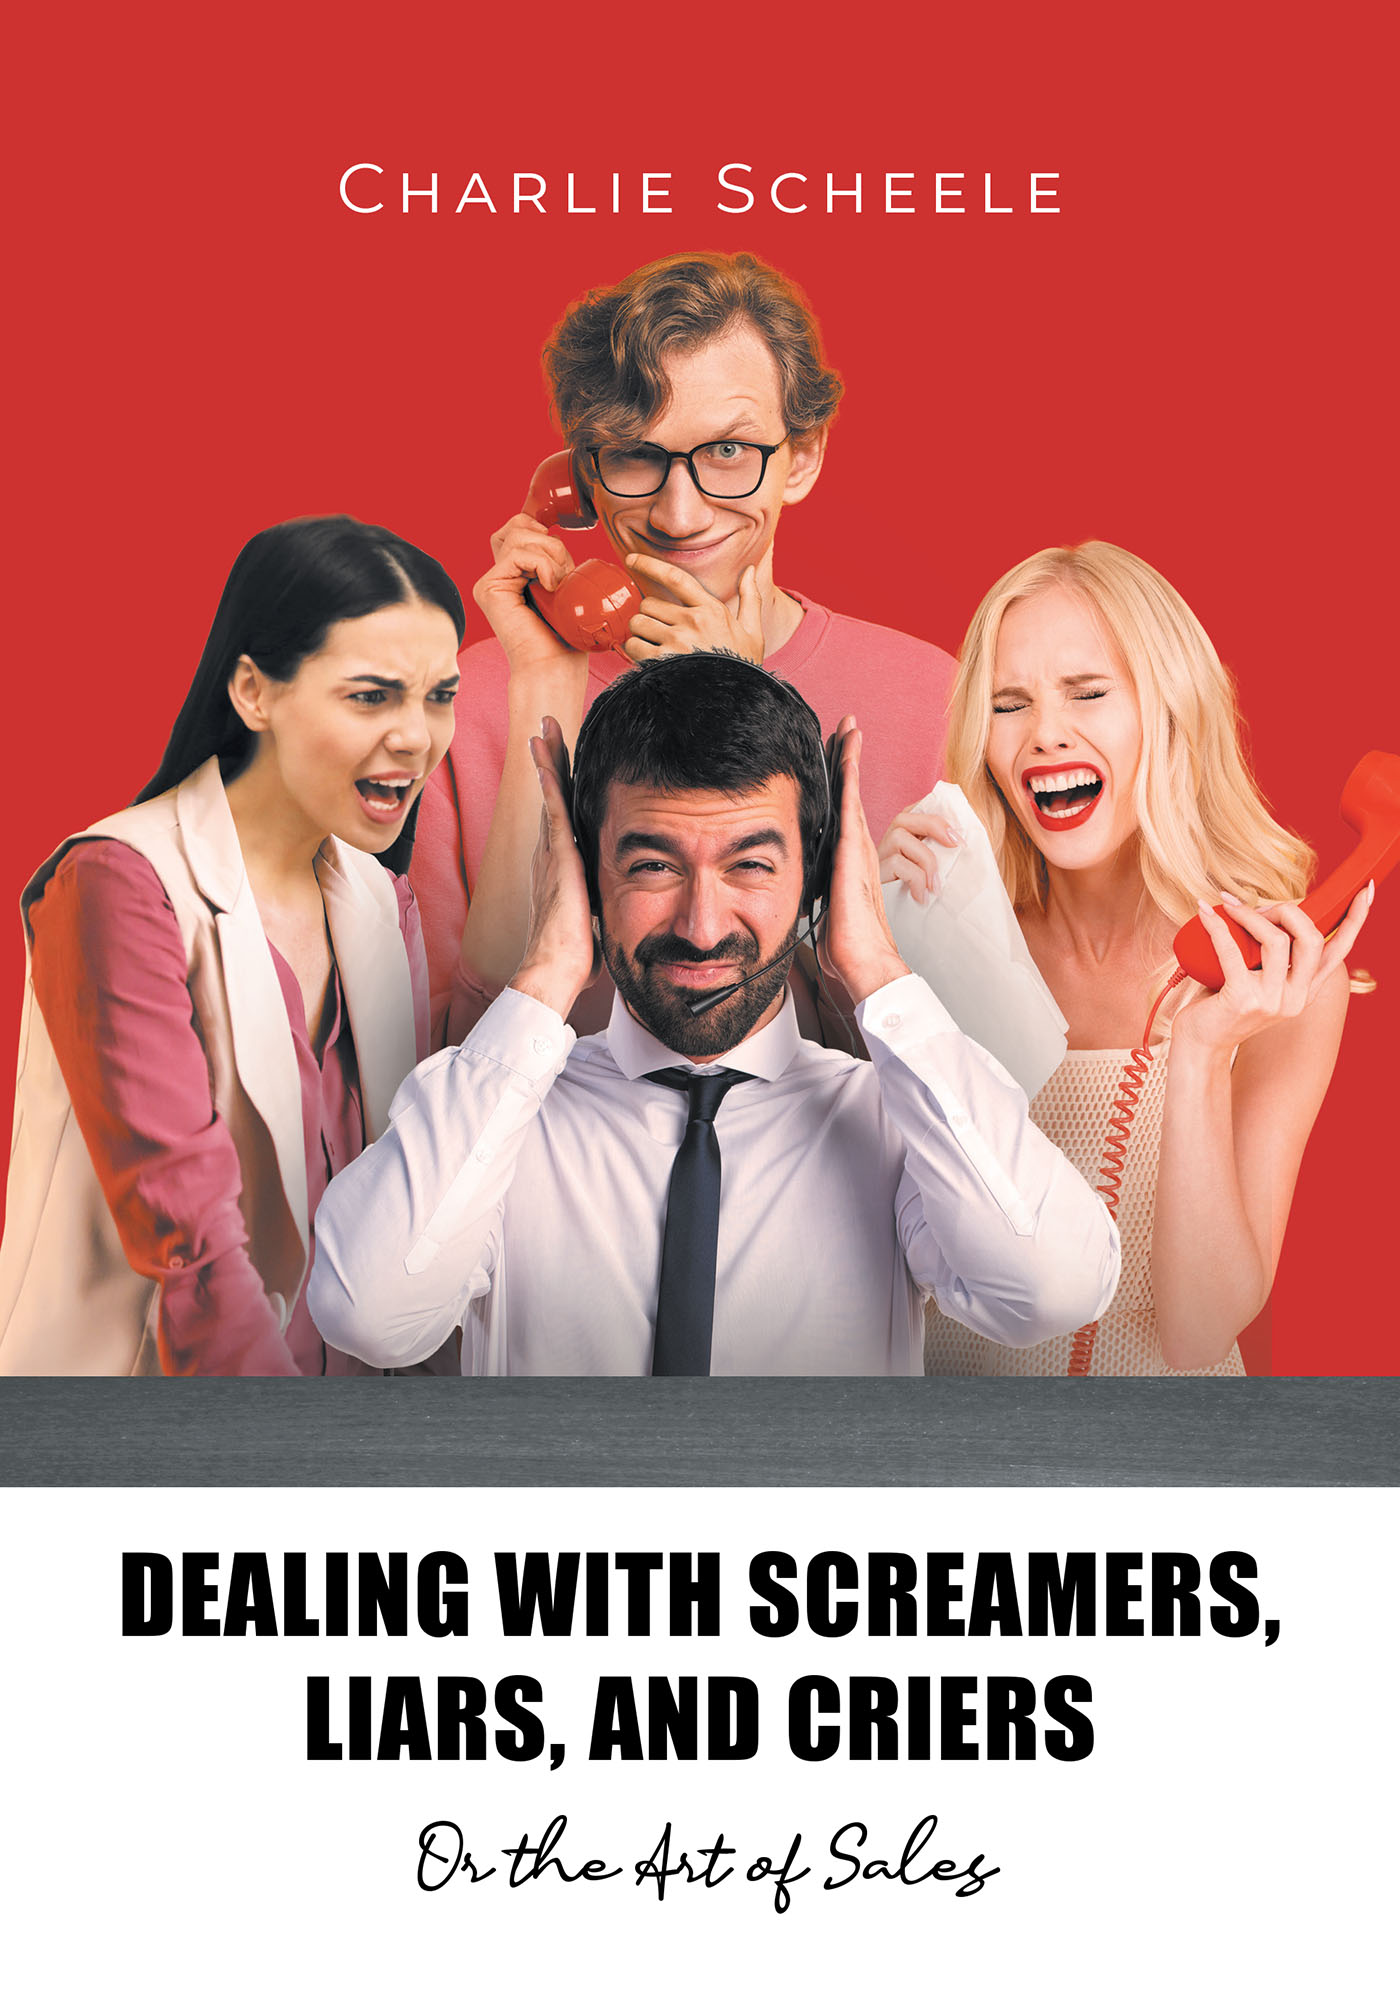 Author Charlie Scheele’s New Book, "Dealing with Screamers, Liars, and Criers," is an Engaging Reflection on Various Formative Events in His Life and Wide-Ranging Career